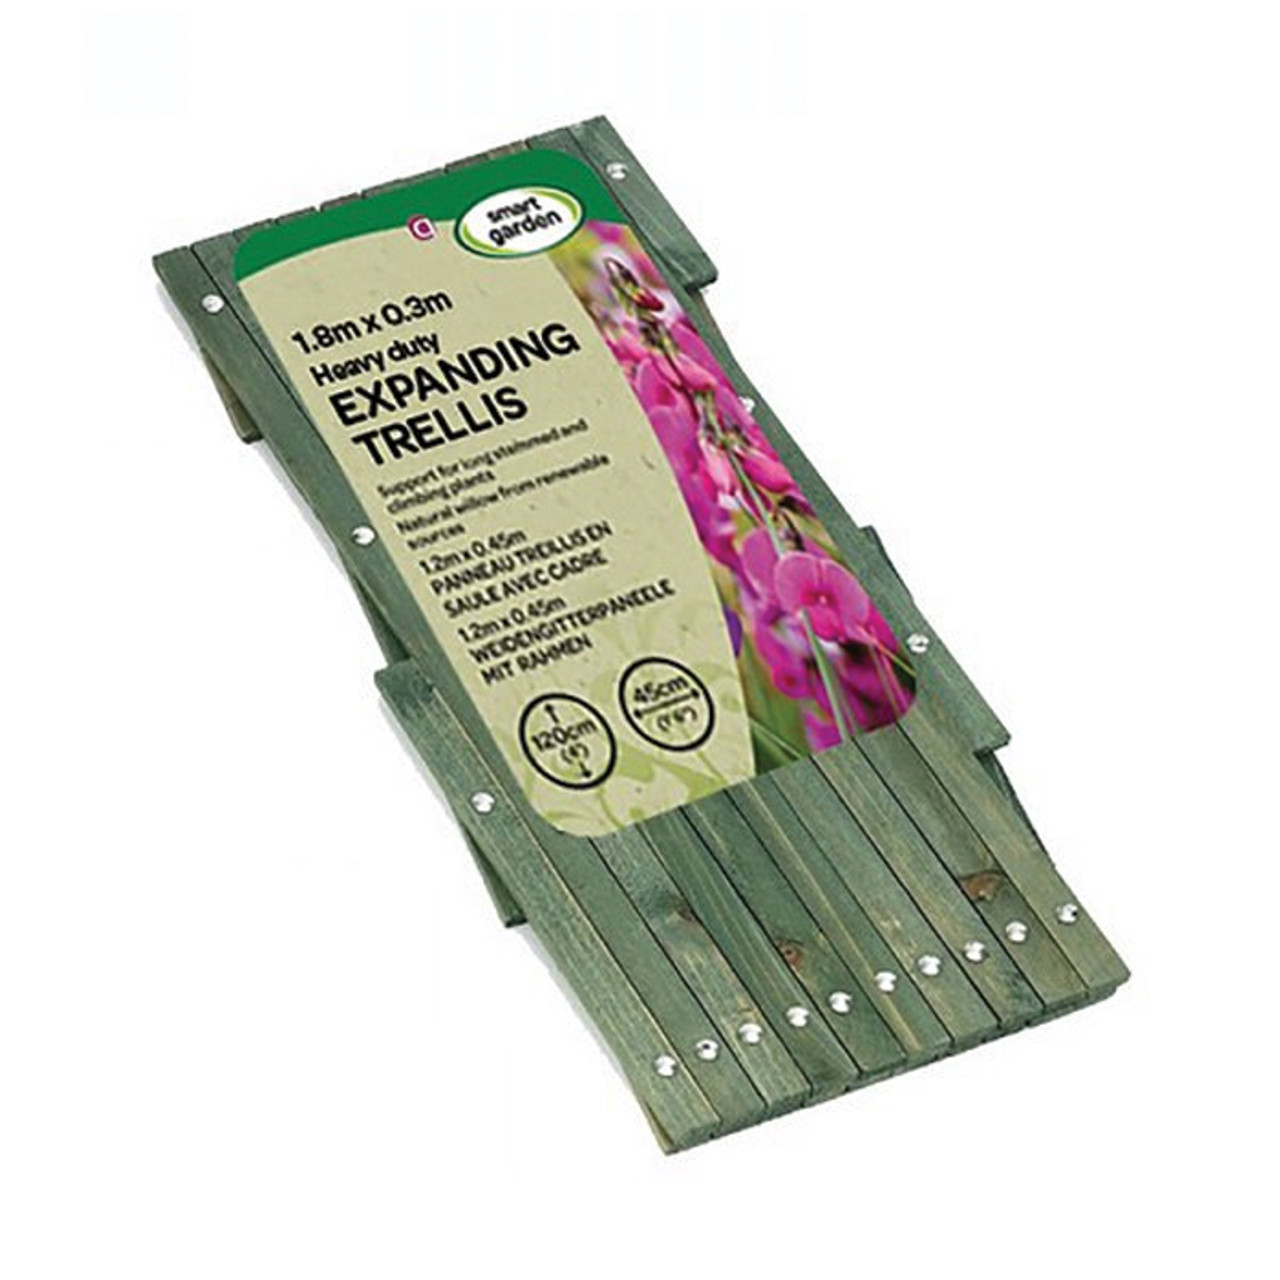 Heavy Duty Expanding Trellis - Green 1.8 x 0.9m (*in-store only)